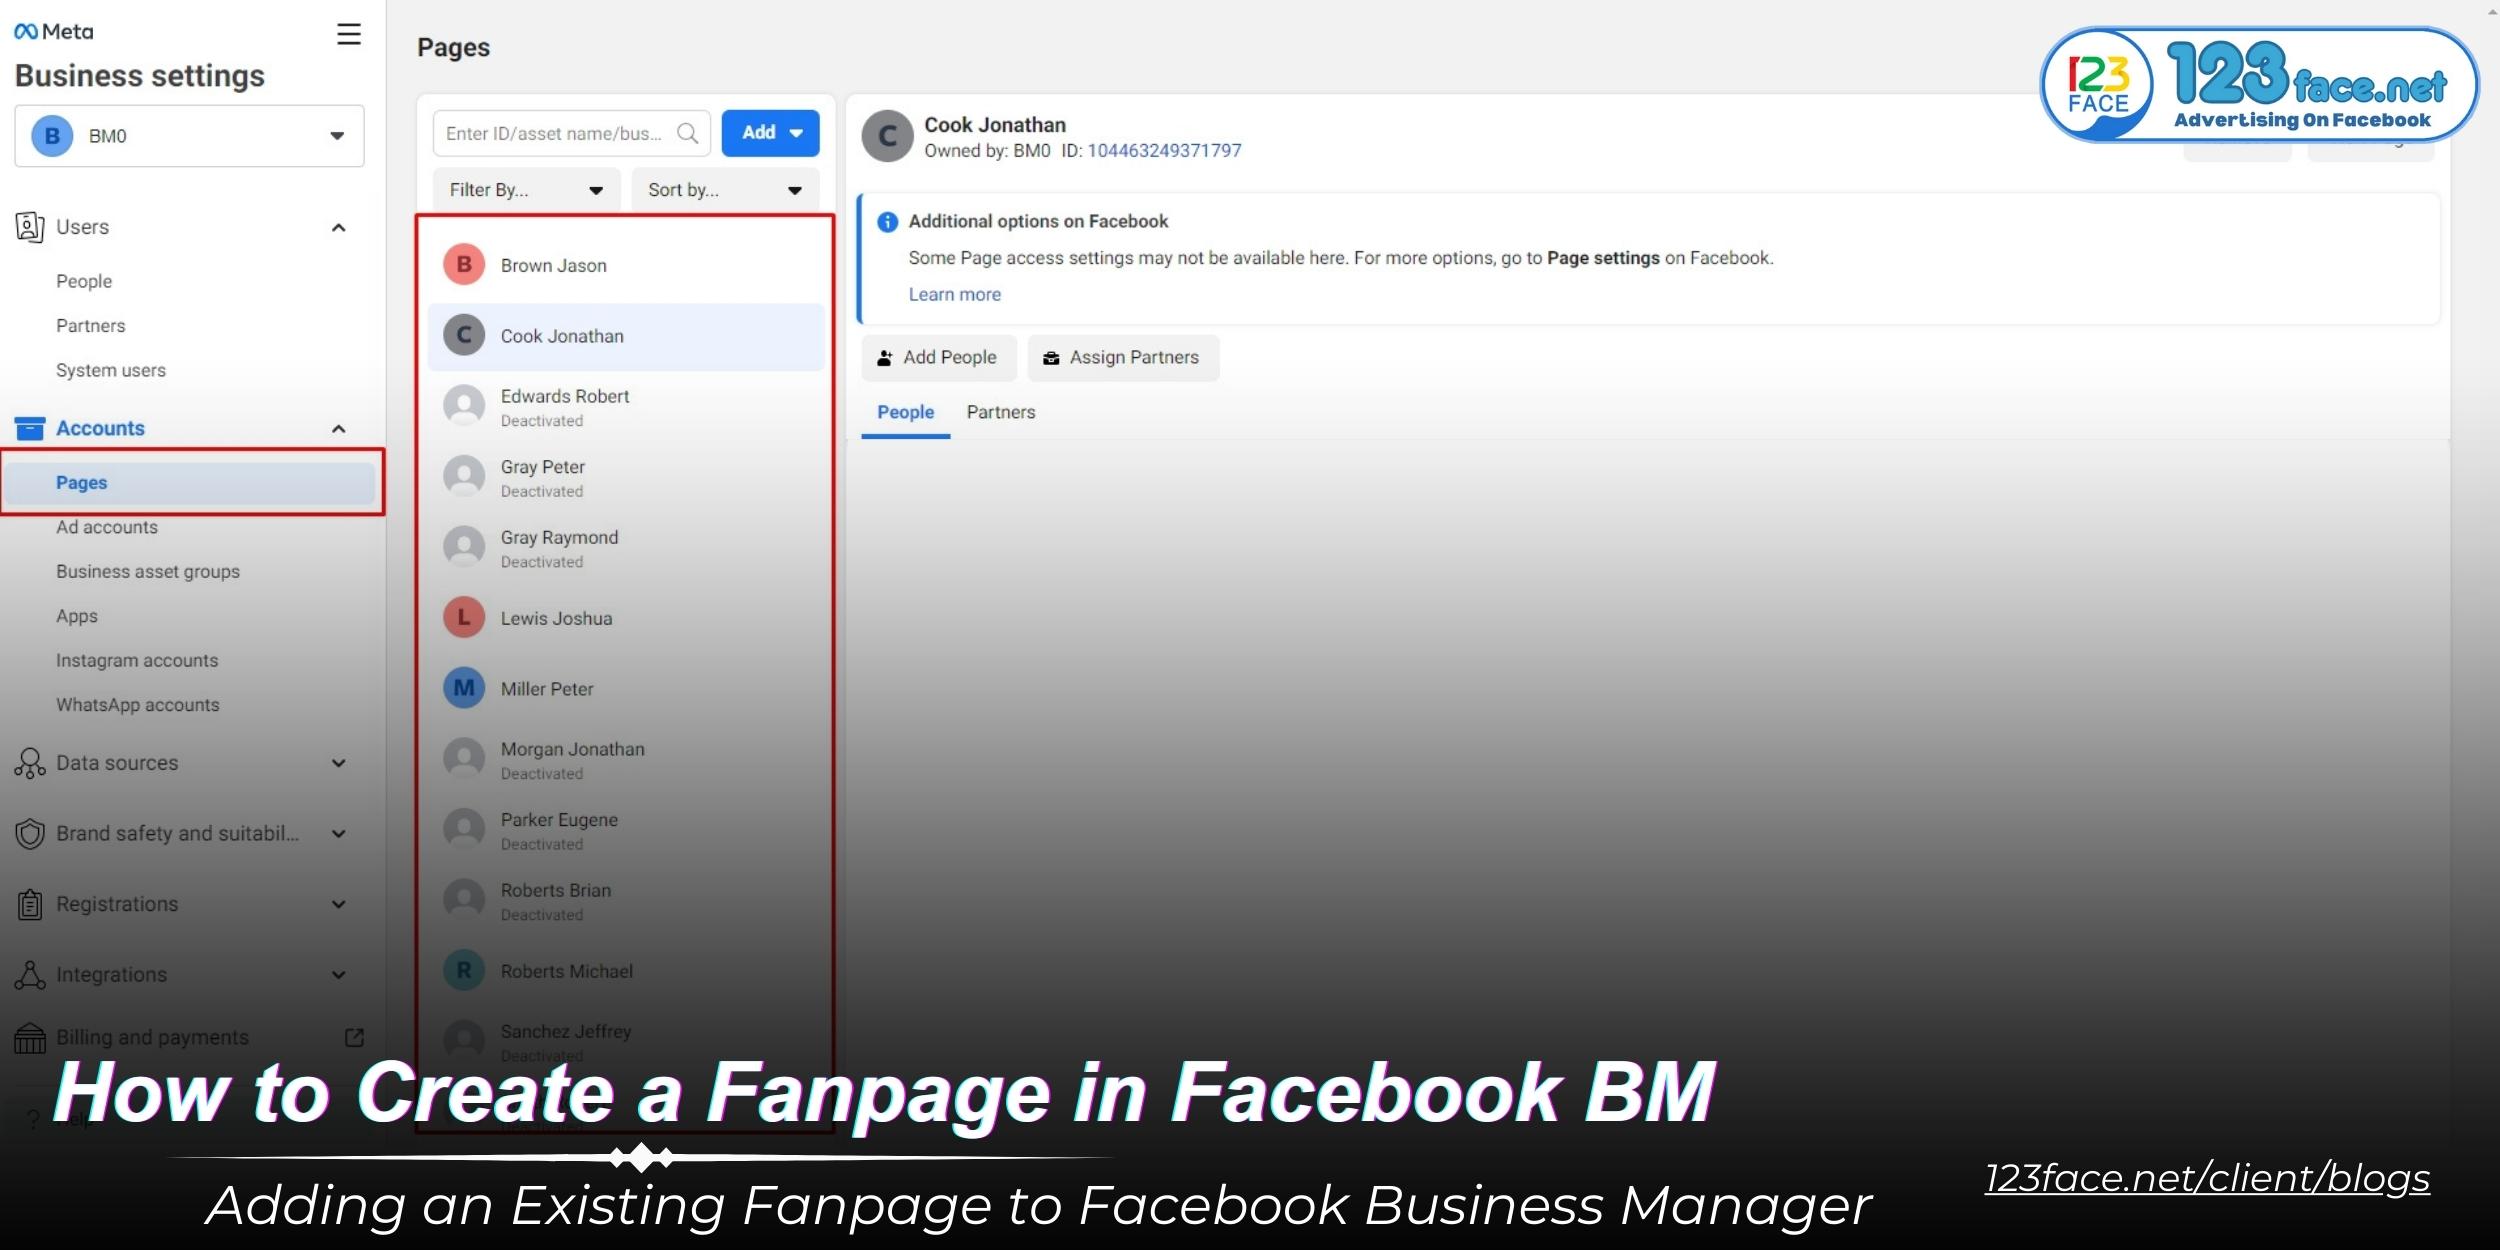 Instructions for creating FanPage and adding FanPage to the business management (BM)